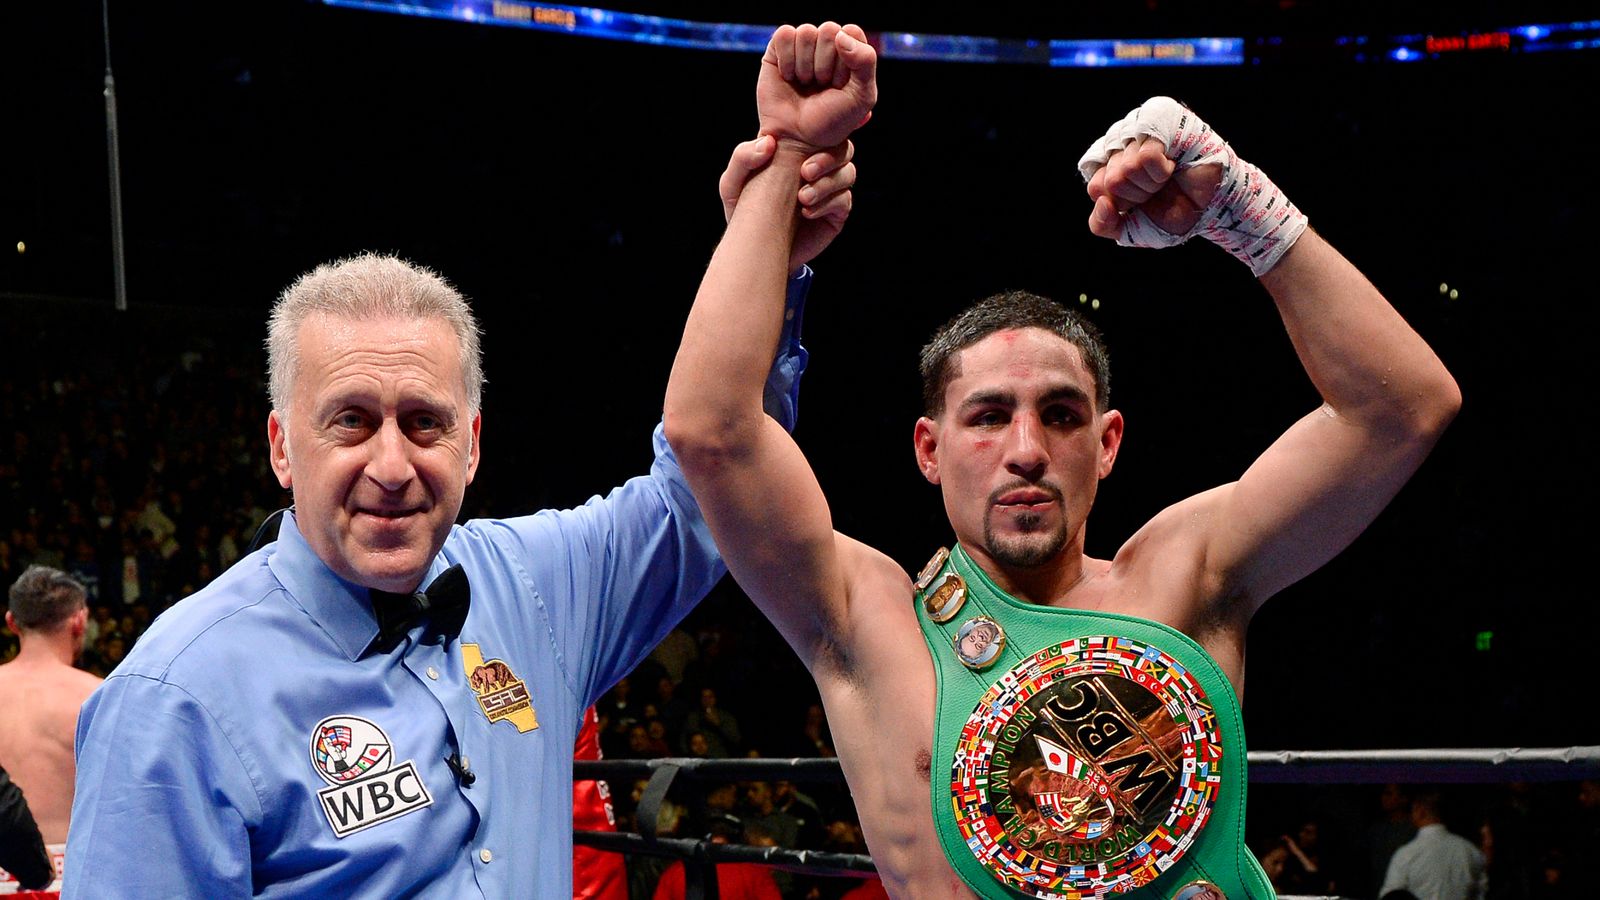 Danny Garcia sets up possible rematch with Amir Khan after WBC win | Boxing News | Sky ...